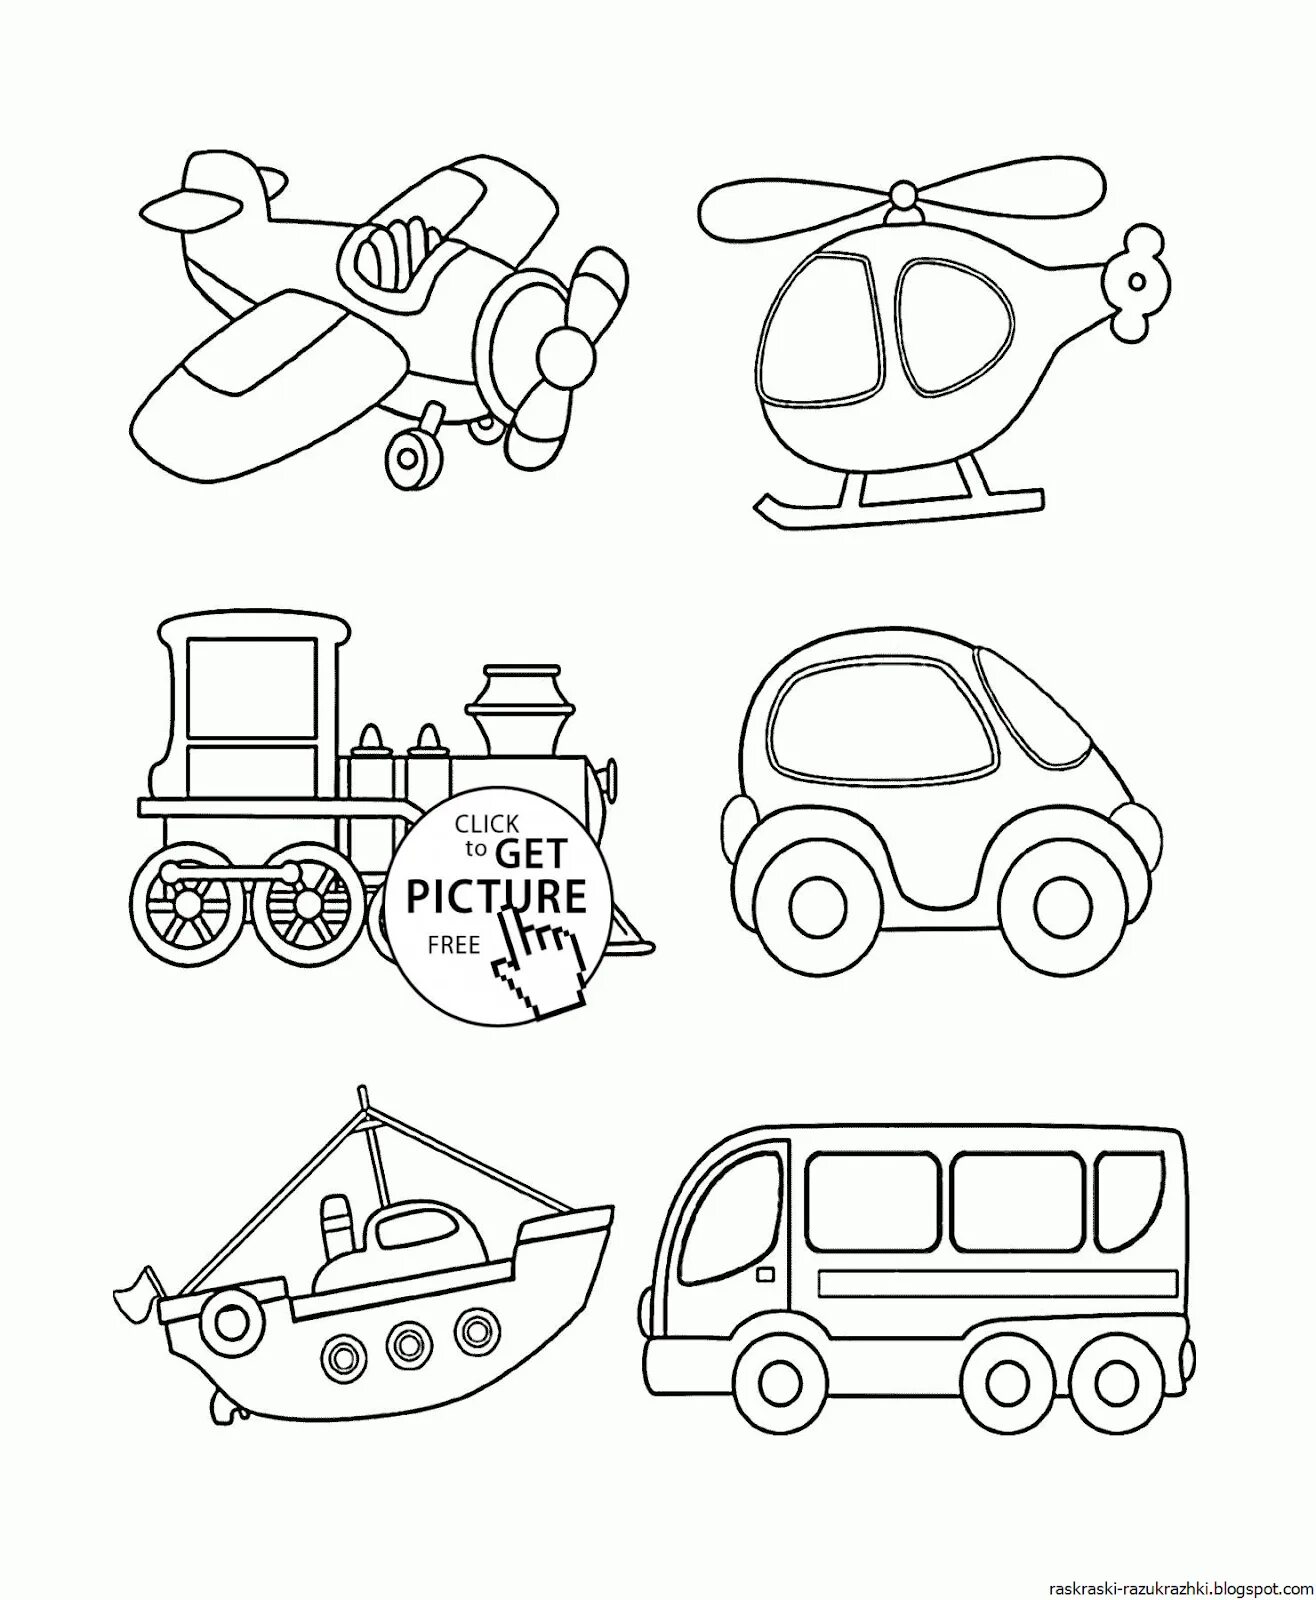 Amazing unicycle coloring page for 6-7 year olds